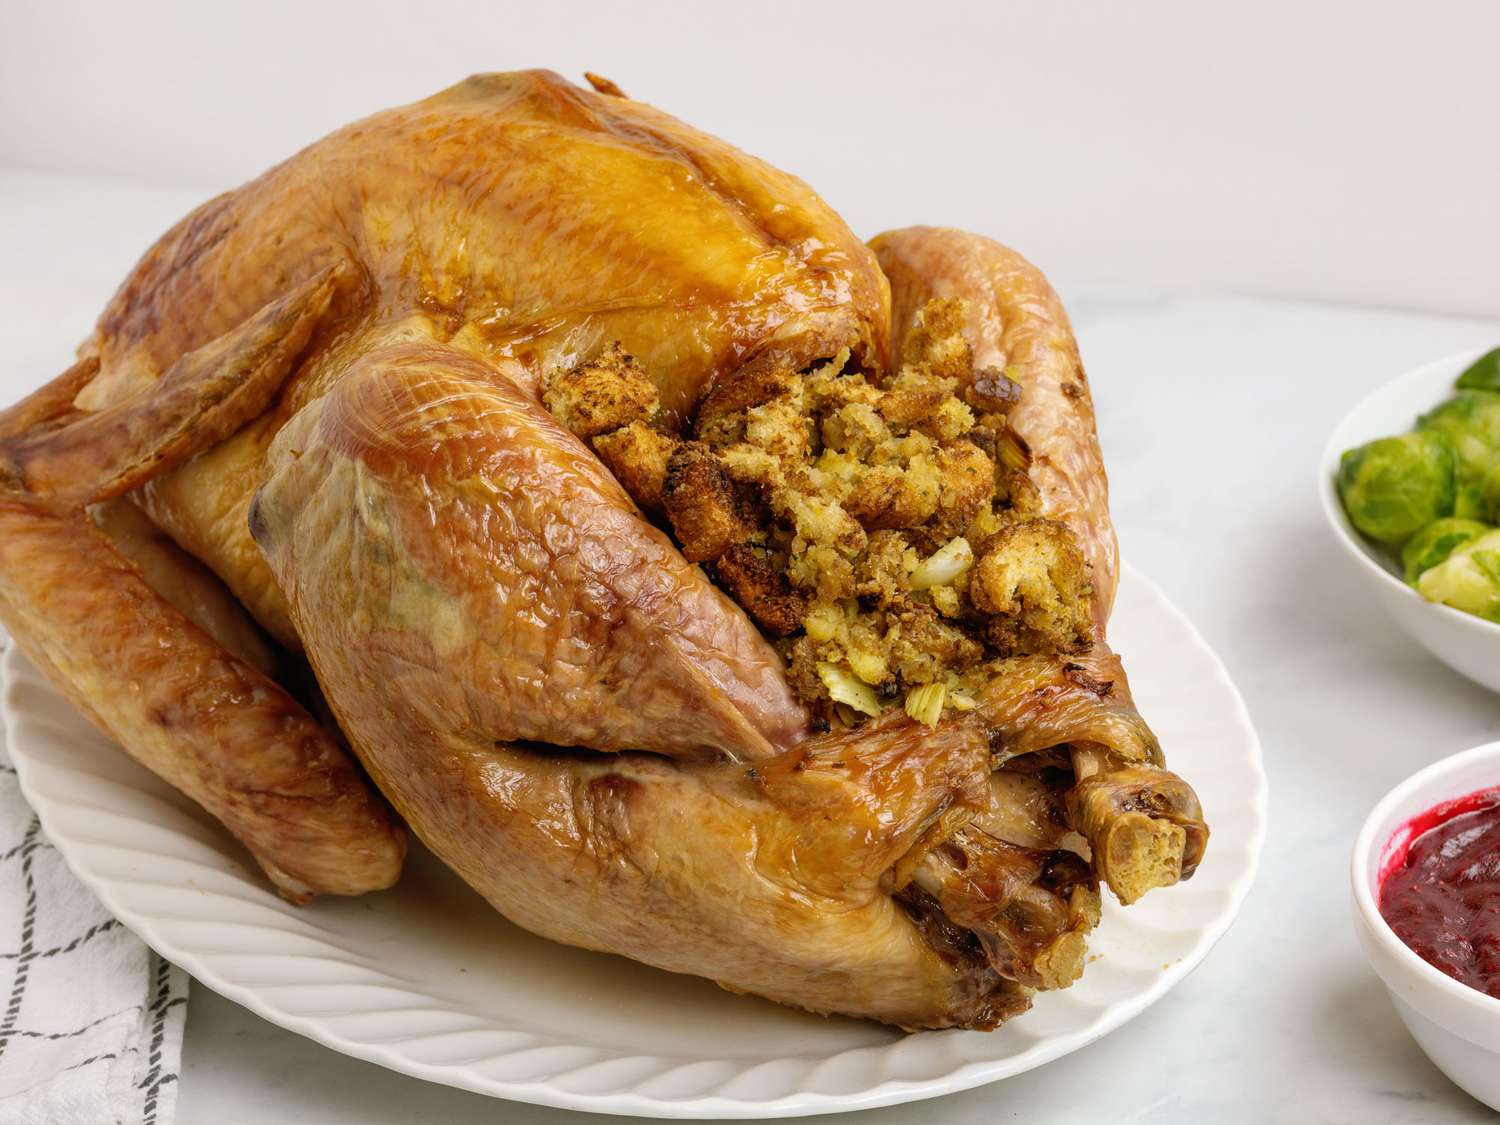 How to Make Turkey Stuffing? - Top Cookery